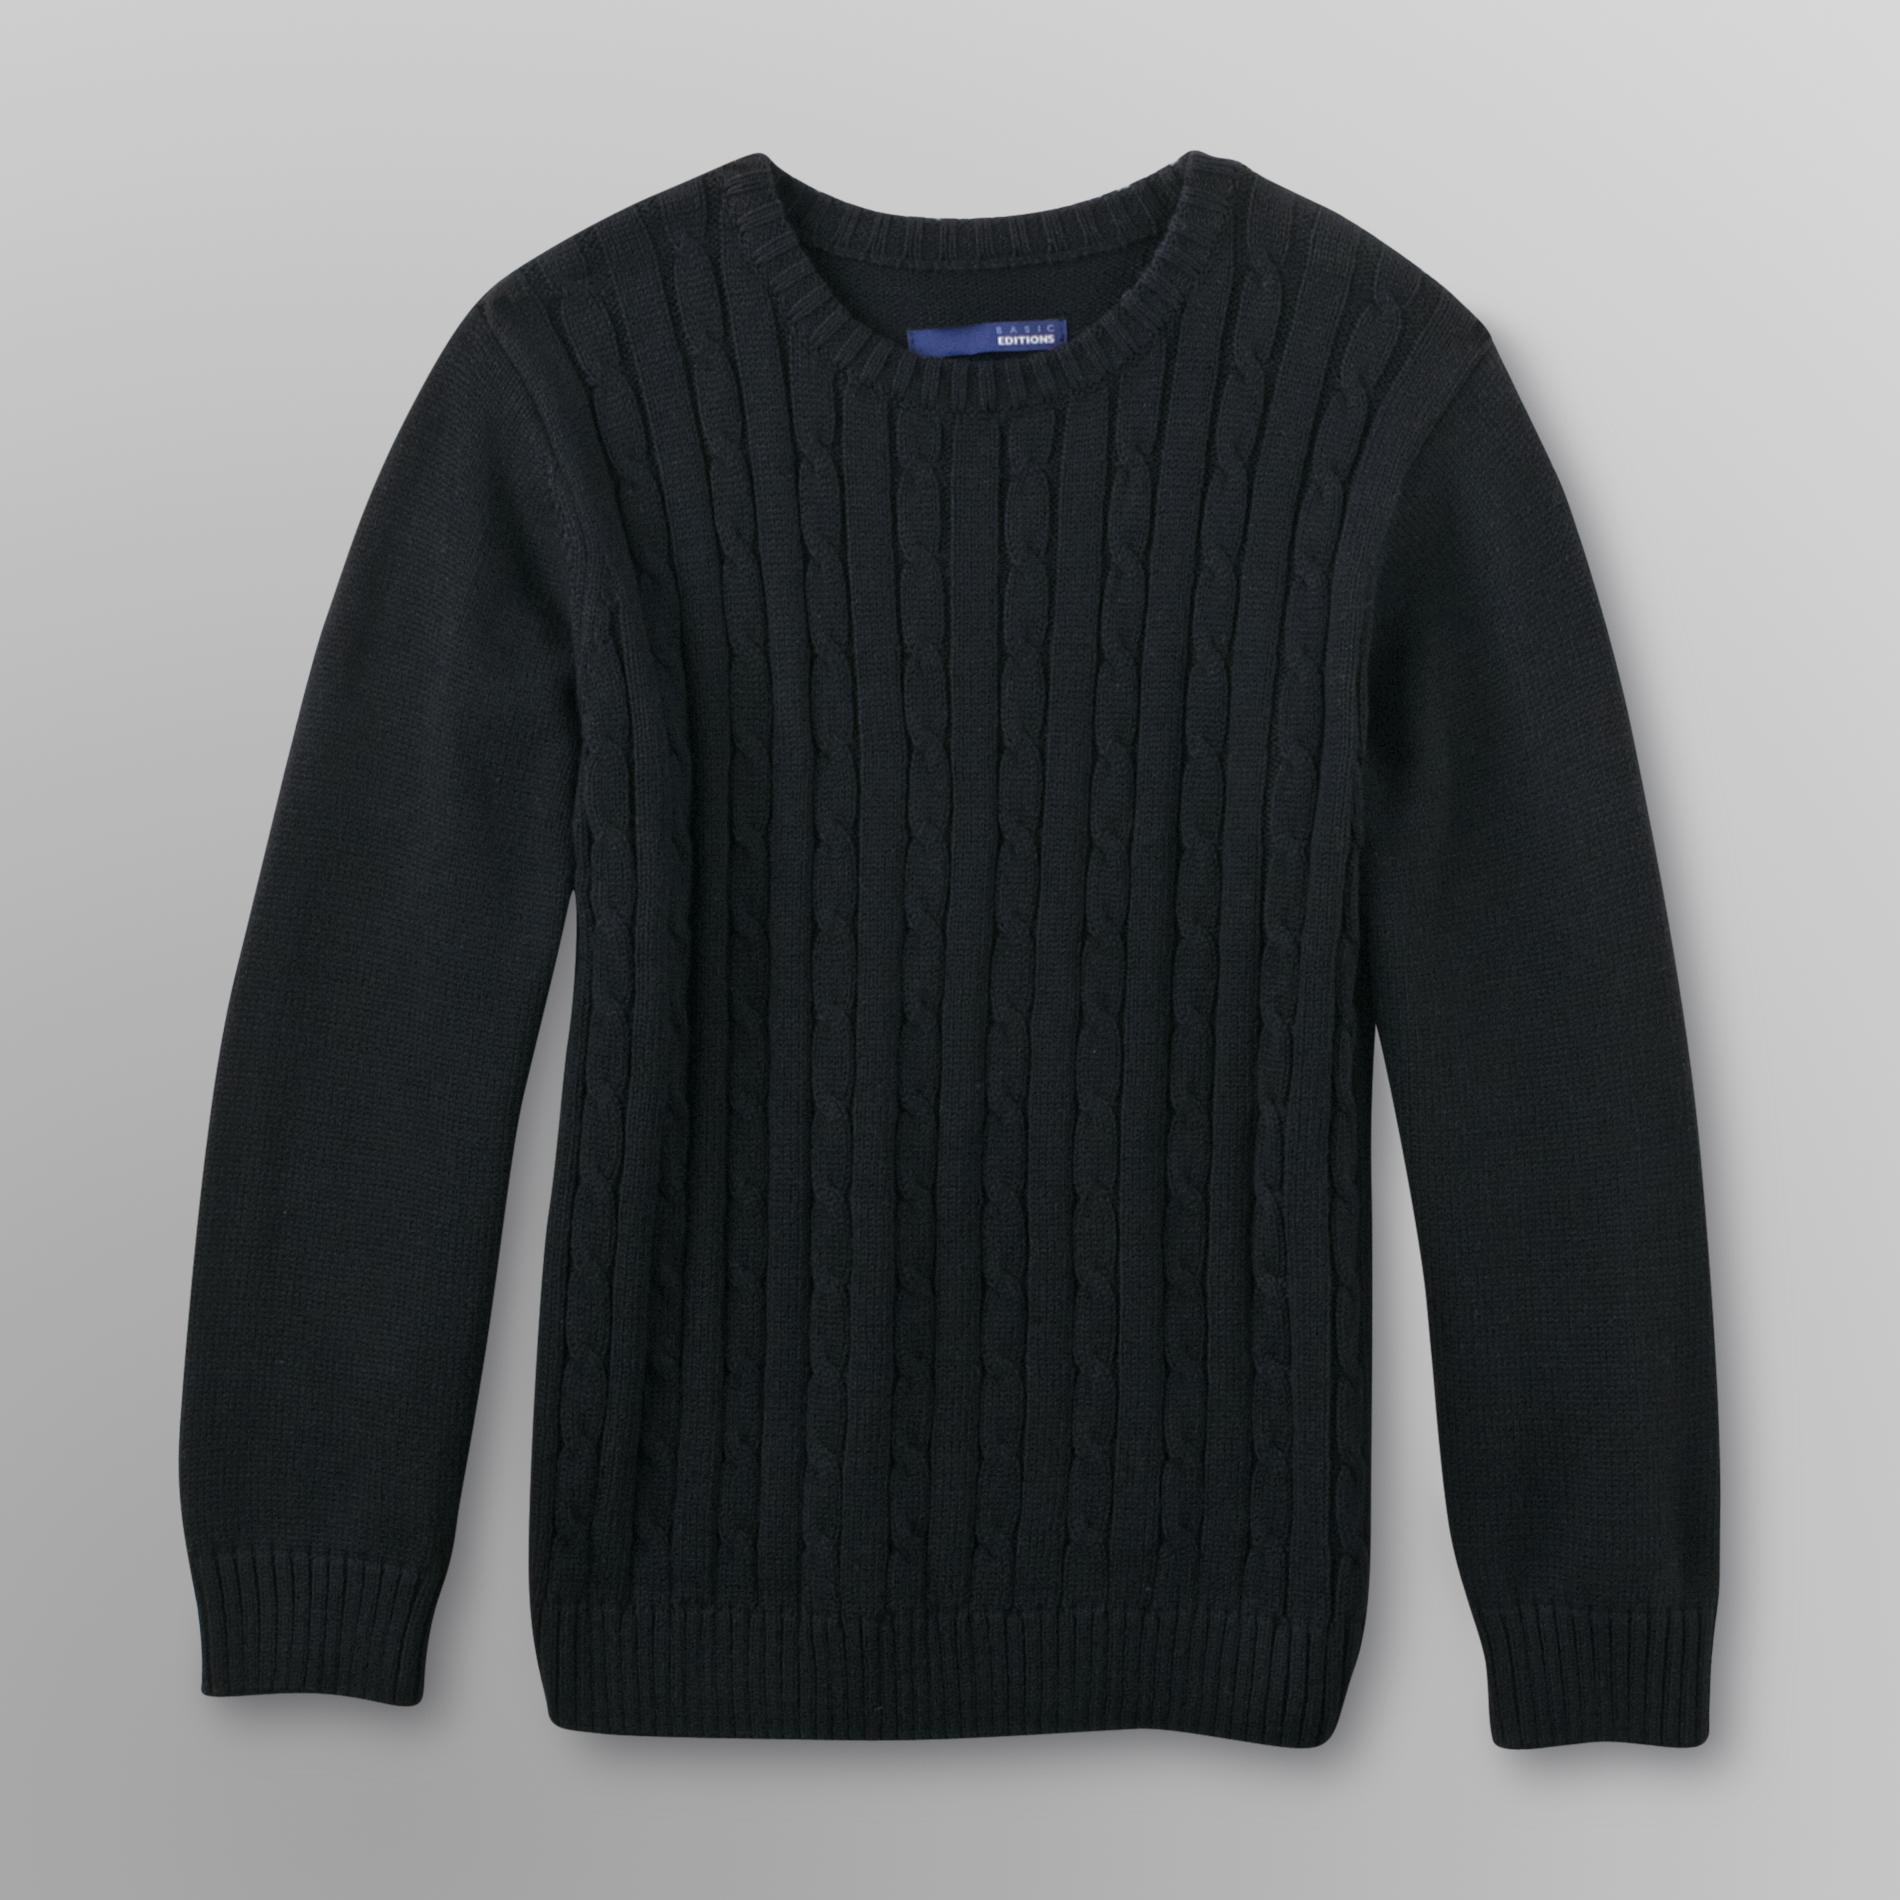 Basic Editions Boy's Cable Knit Sweater